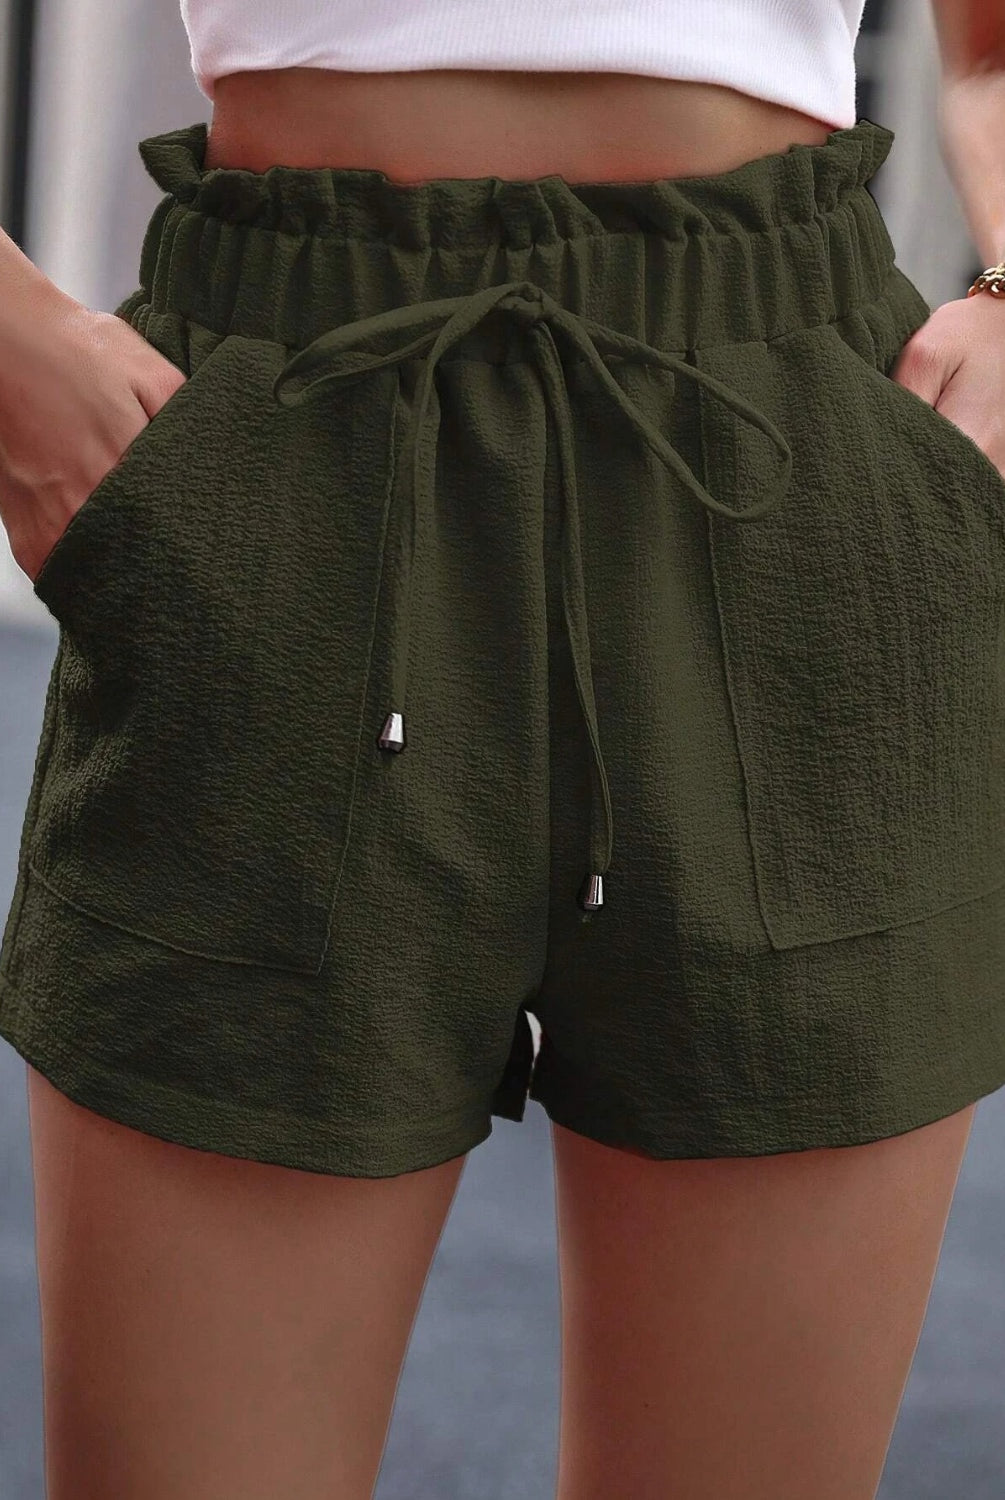 Tied High Waist Shorts with Pockets - GemThreads Boutique Tied High Waist Shorts with Pockets